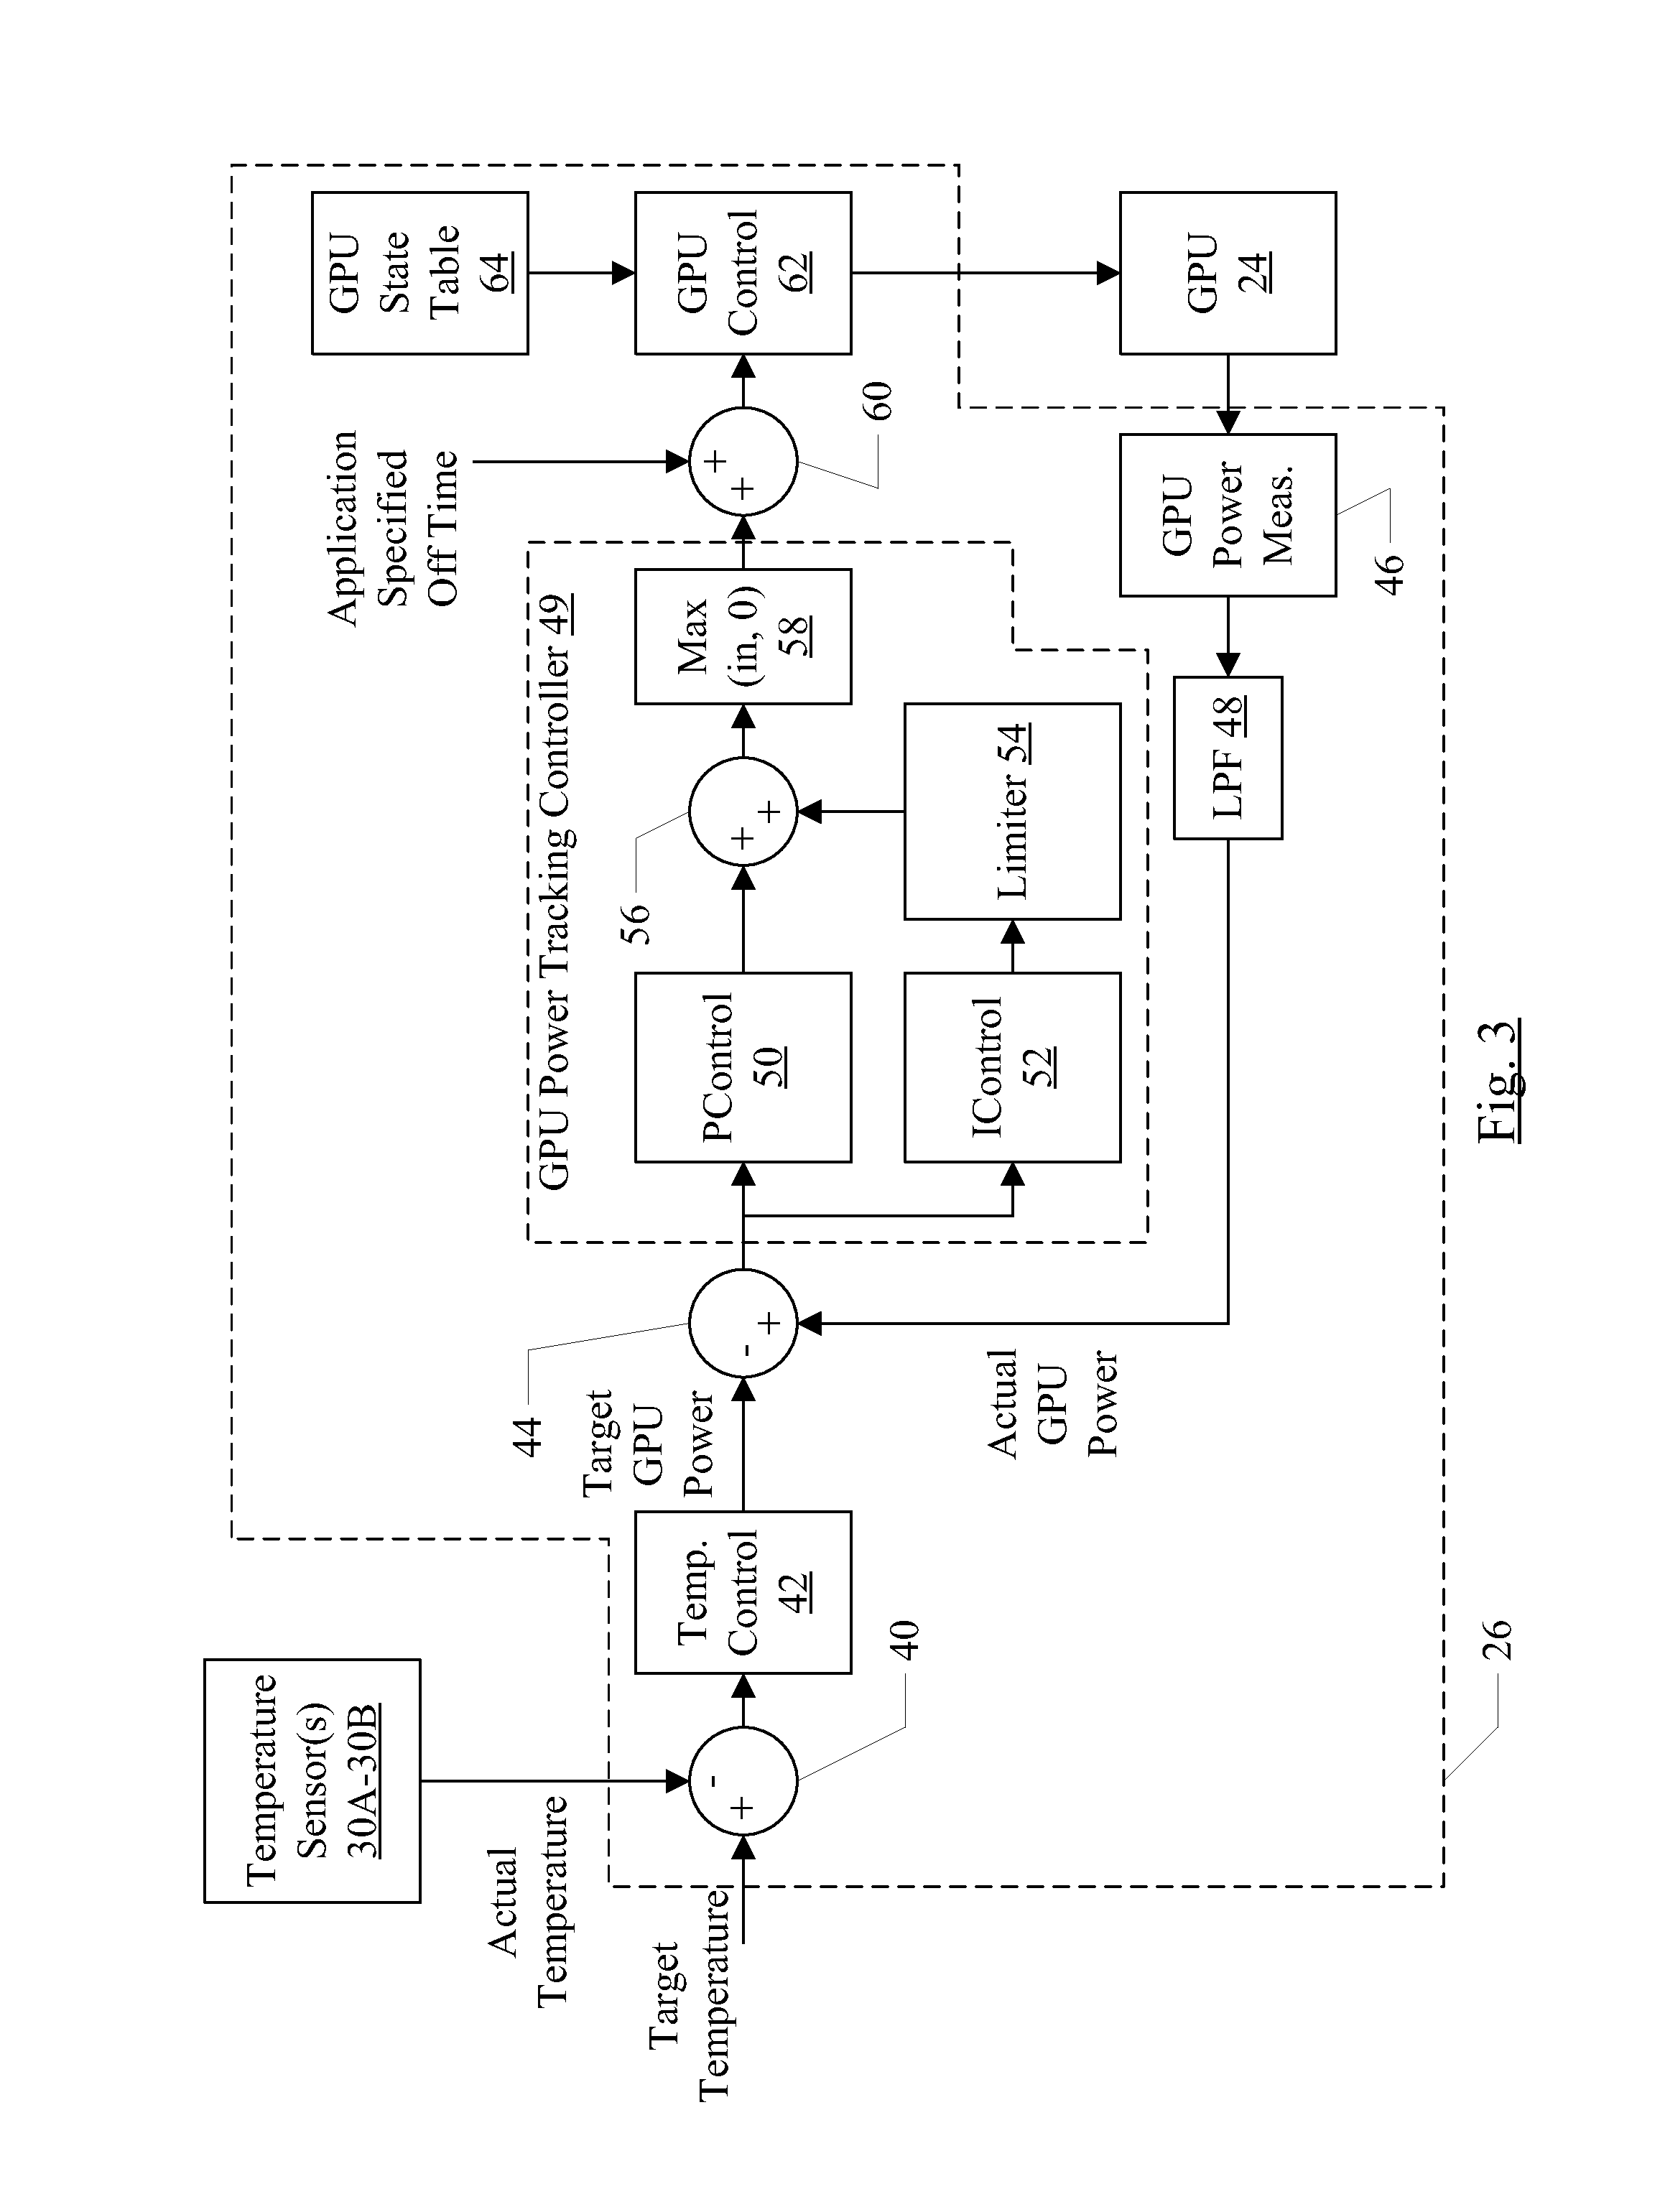 Power management for a graphics processing unit or other circuit